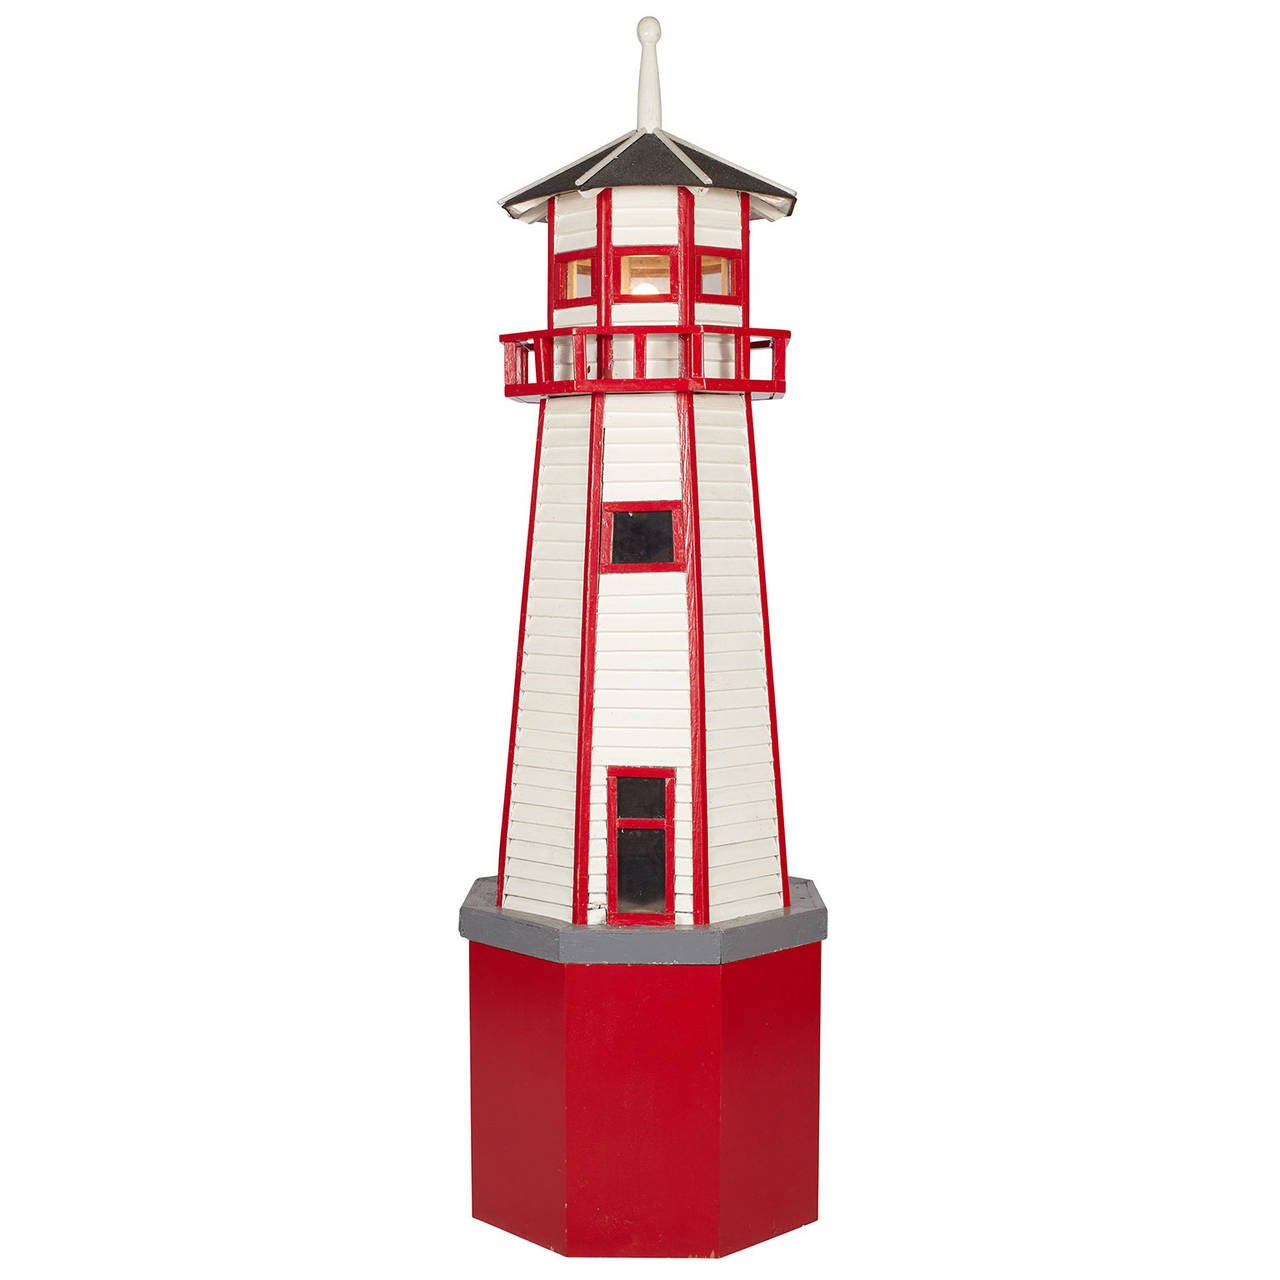 A large, handcrafted floor lamp model of a lighthouse with red trim and a white body, American, circa 1940. Also has wooden red painted base.